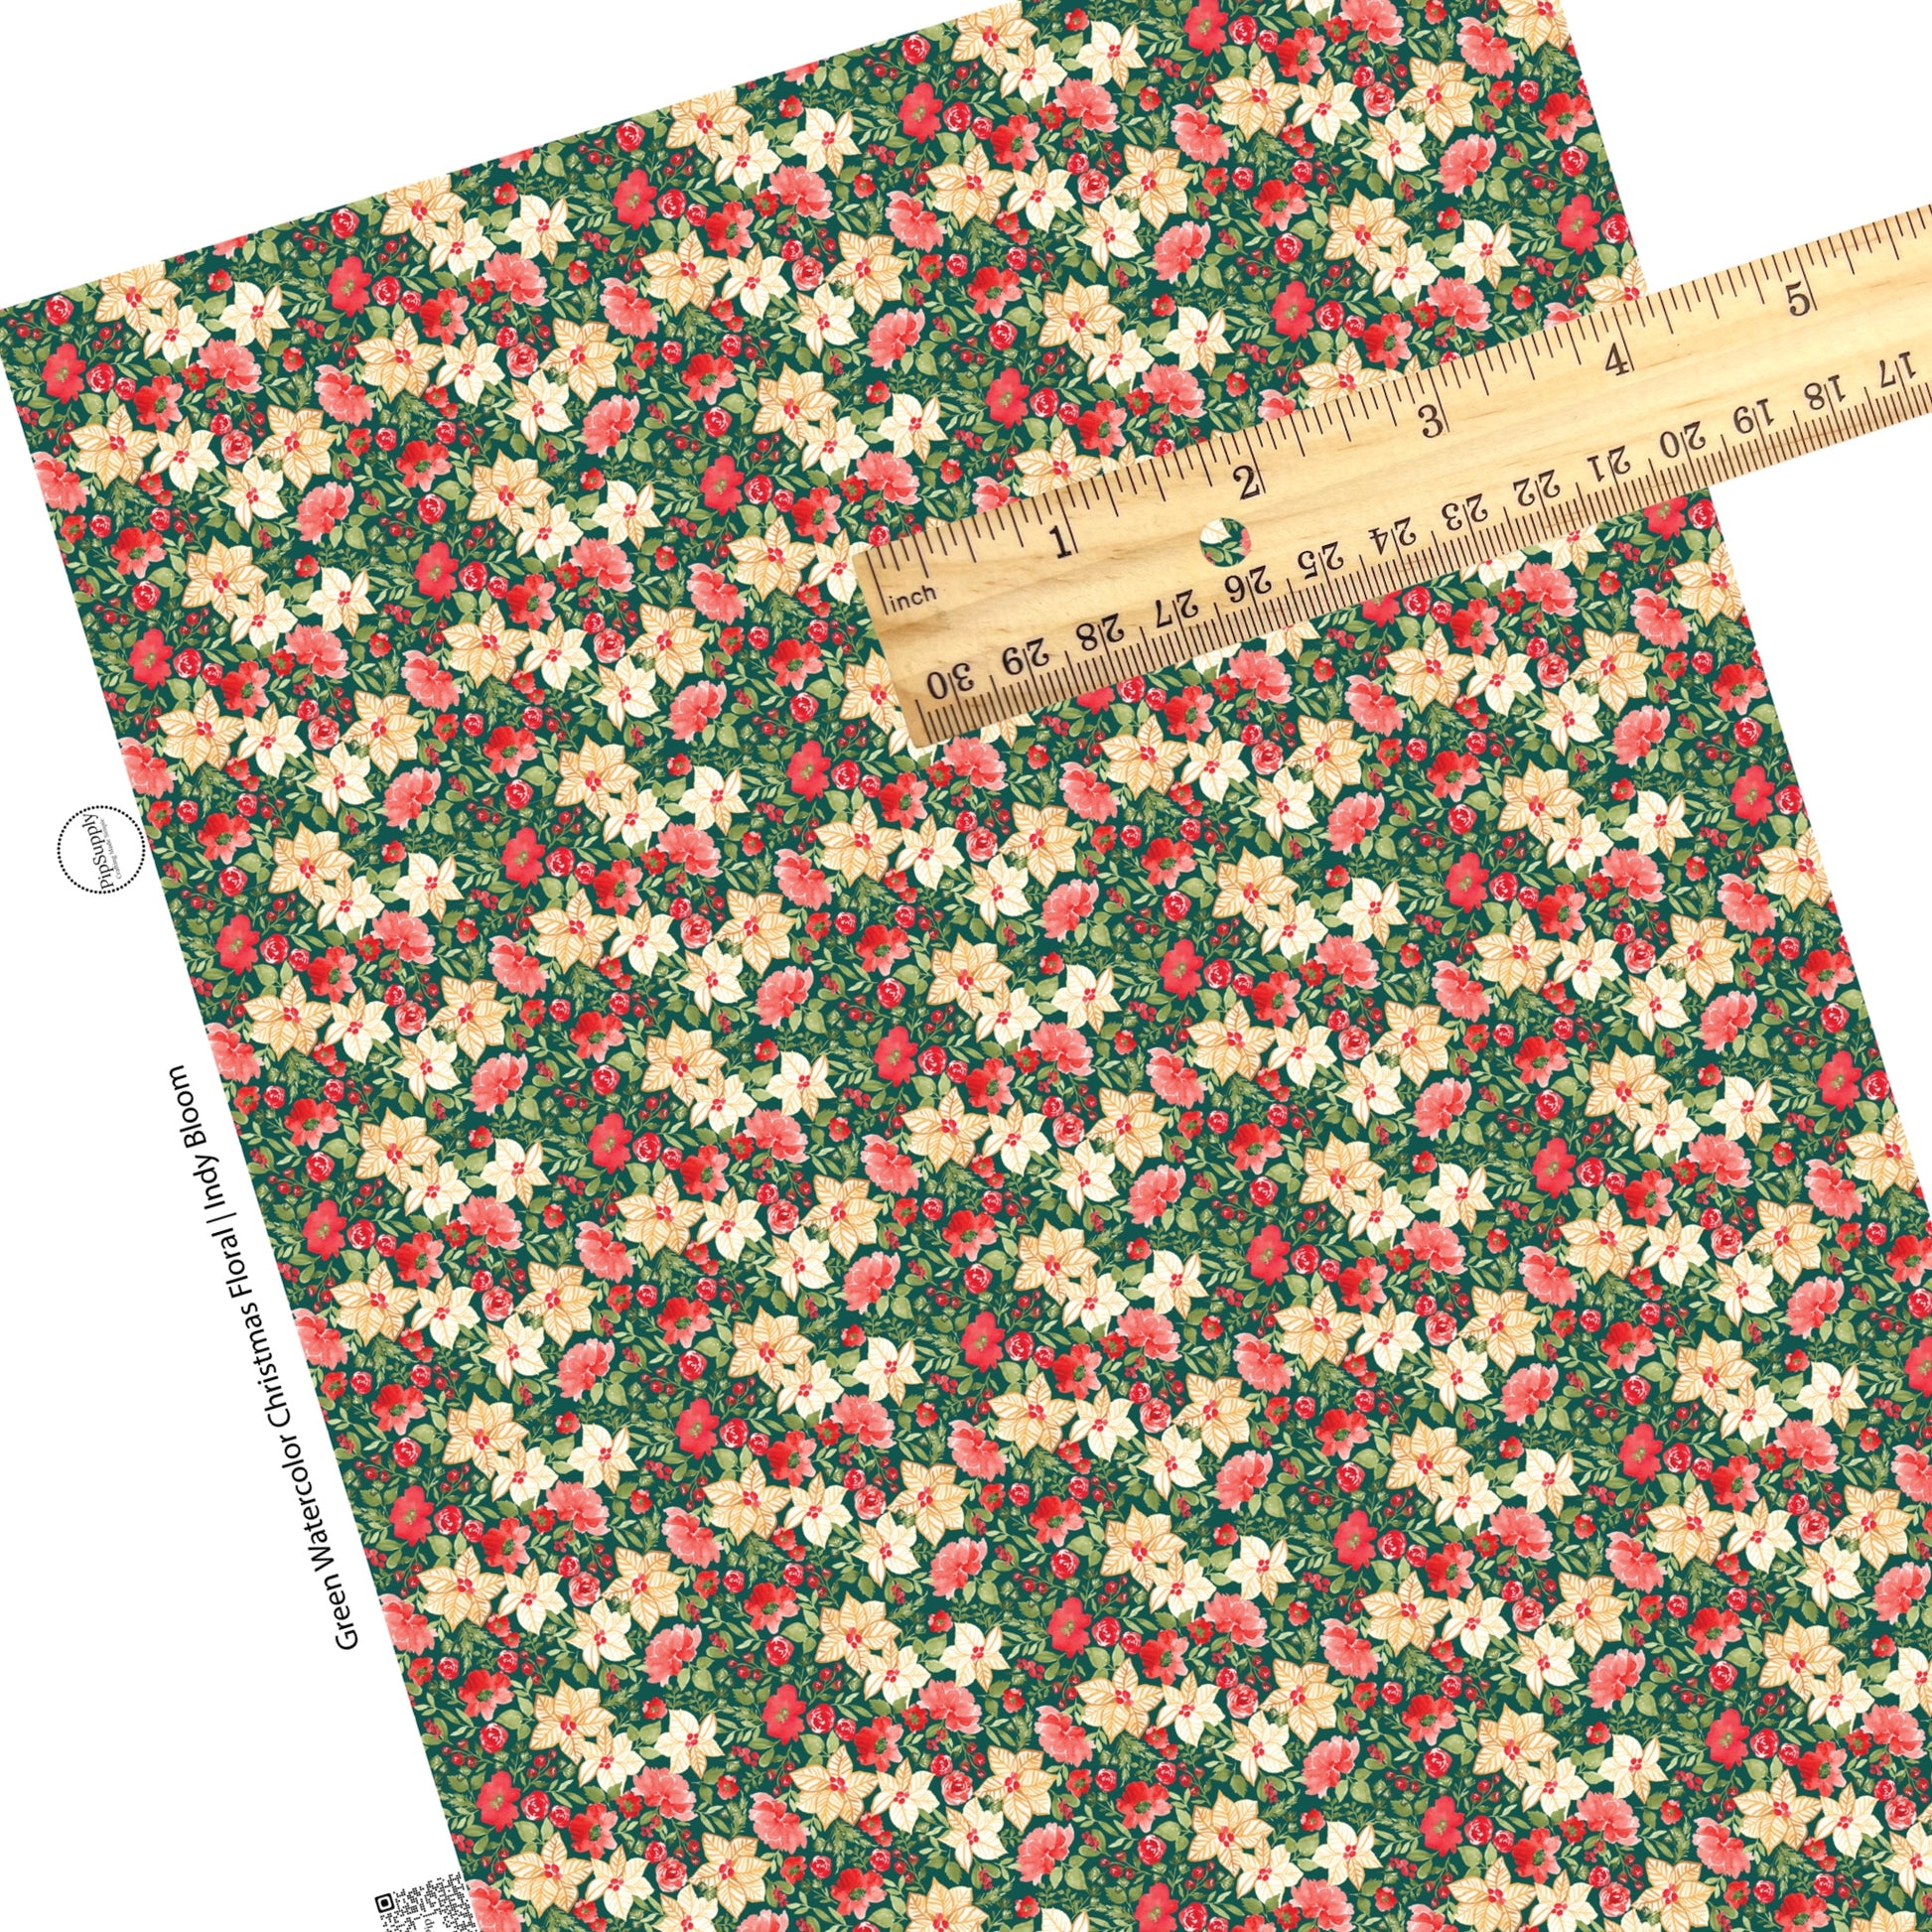 These holiday themed faux leather sheets contain the following design elements: red and ivory colored Christmas flowers on green. Our CPSIA compliant faux leather sheets or rolls can be used for all types of crafting projects.